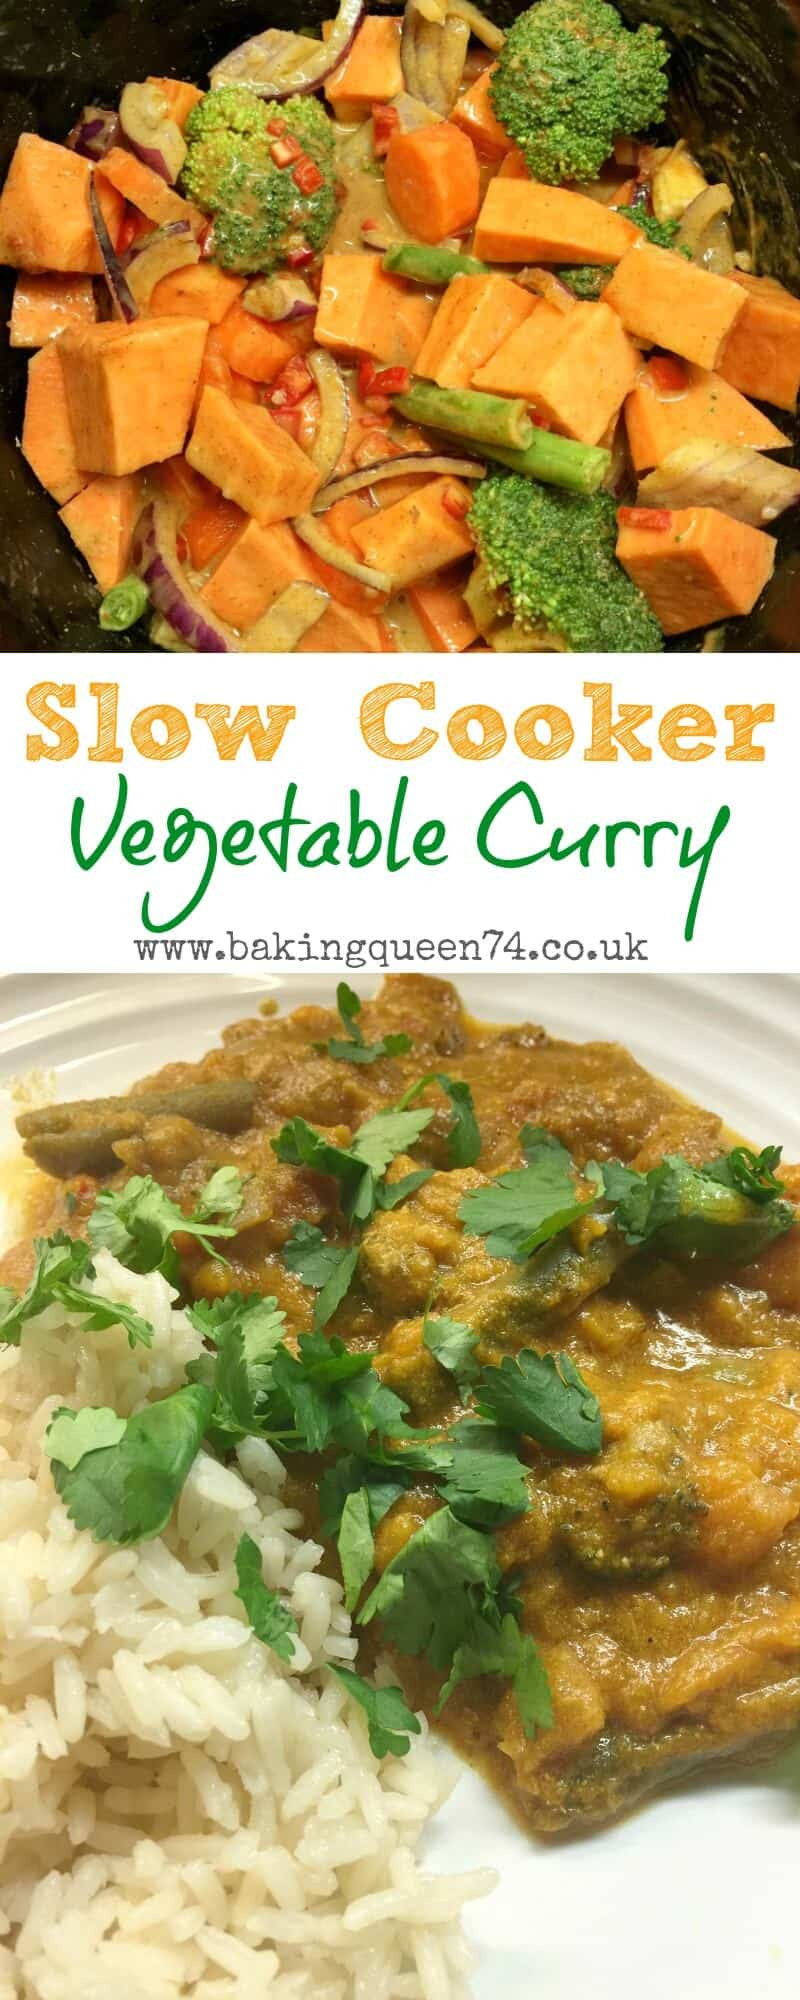 Vegetarian Slow Cooker Recipes
 Slow Cooker Ve able Curry BakingQueen74